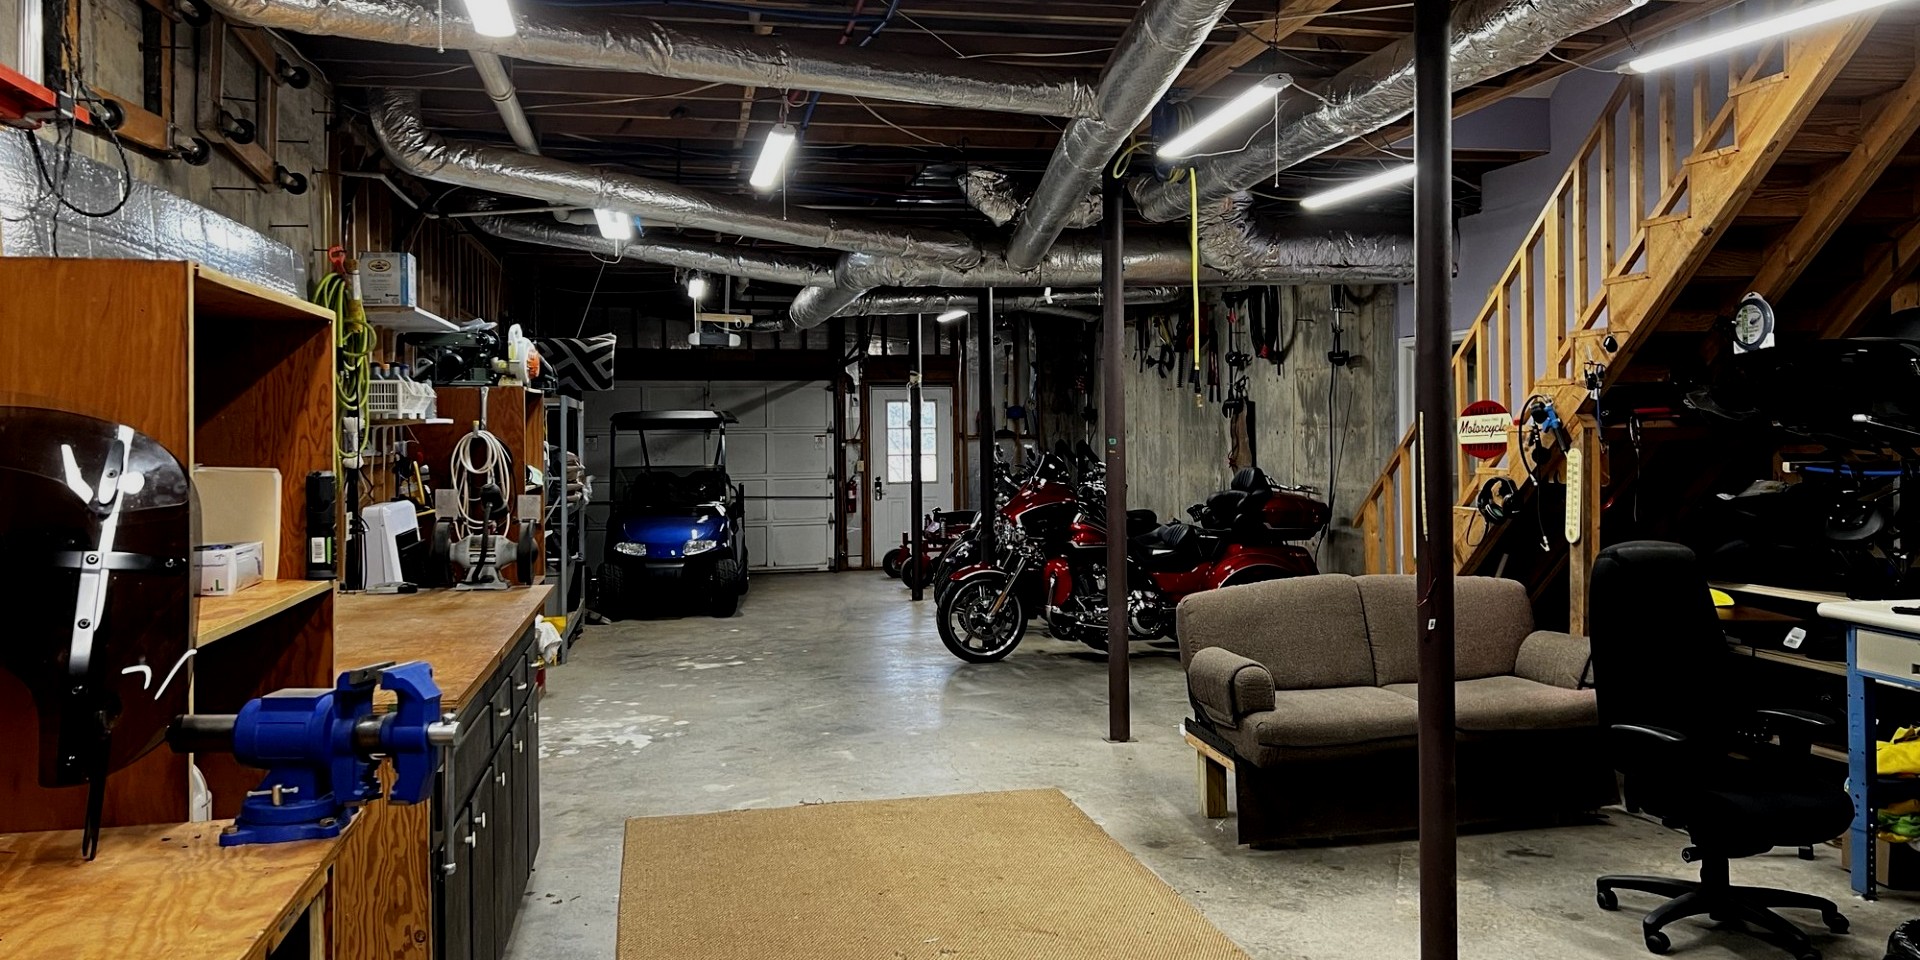 Where should you place a dehumidifier in a garage